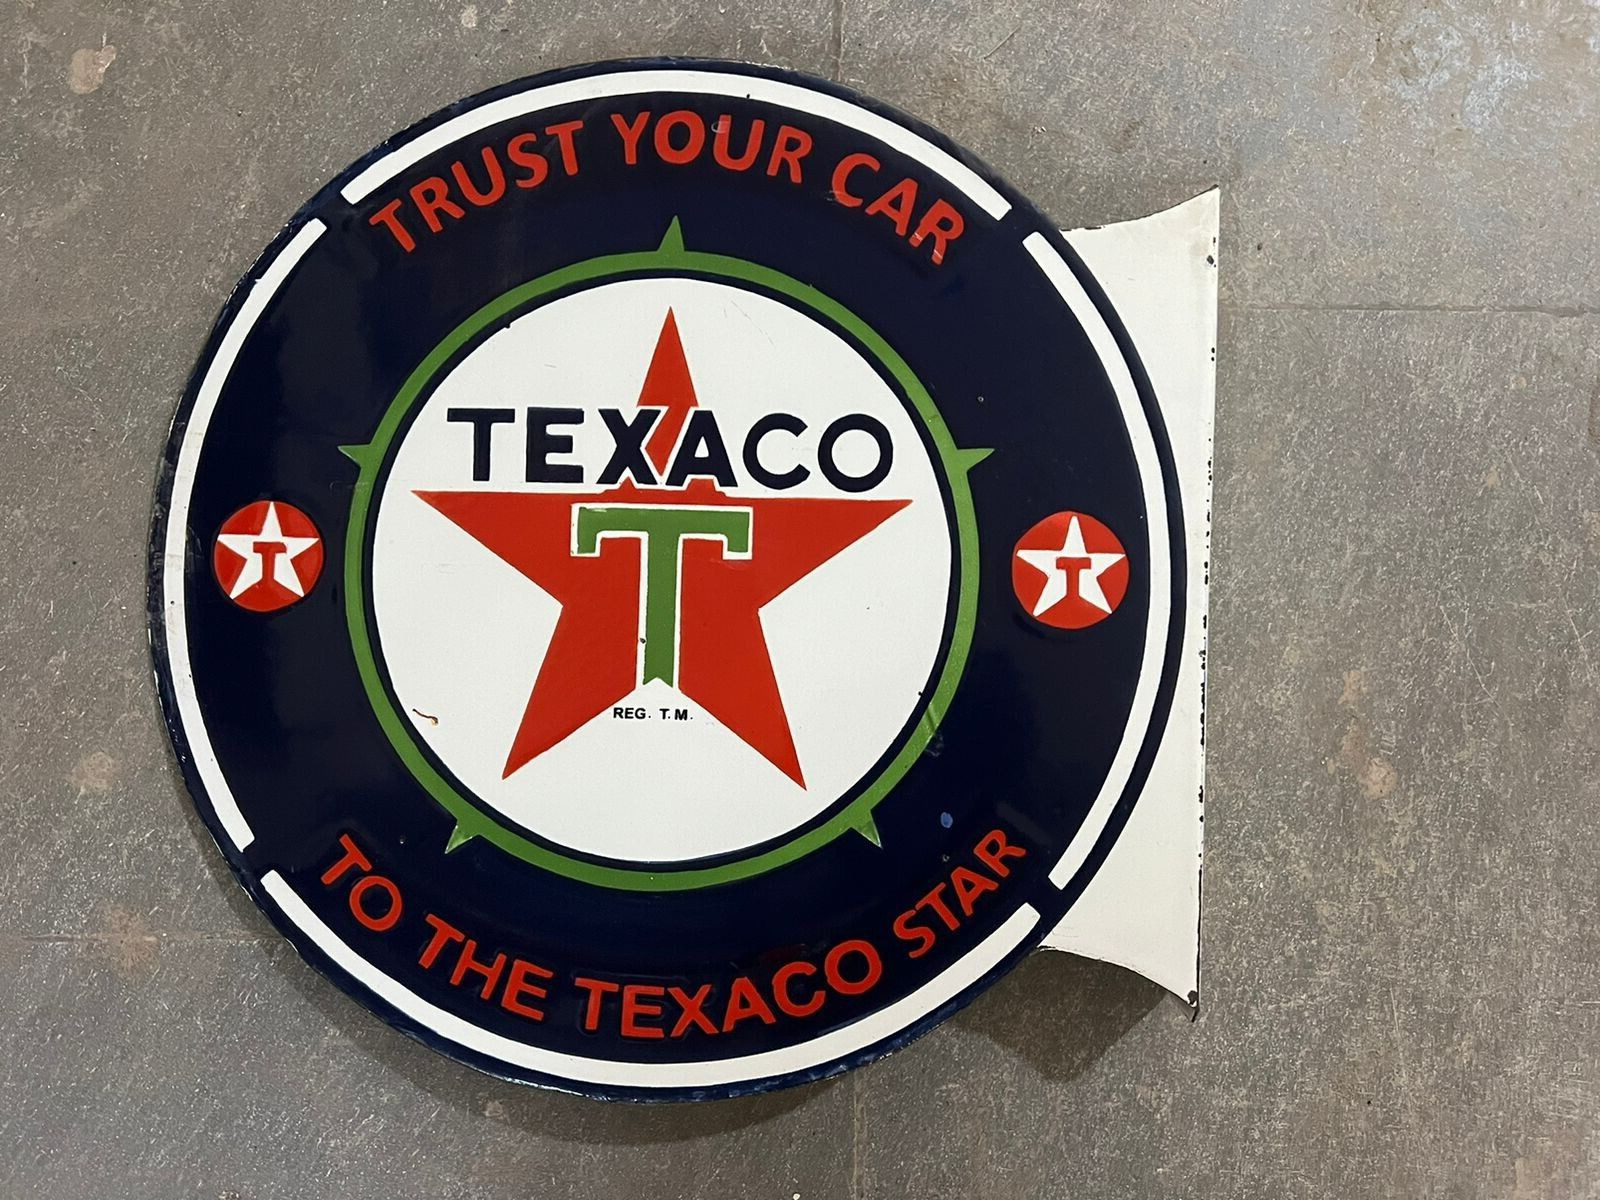 TEXACO PORCELAIN ENAMEL SIGN 18X20.5 INCHES DOUBLE SIDED WITH FLANGE